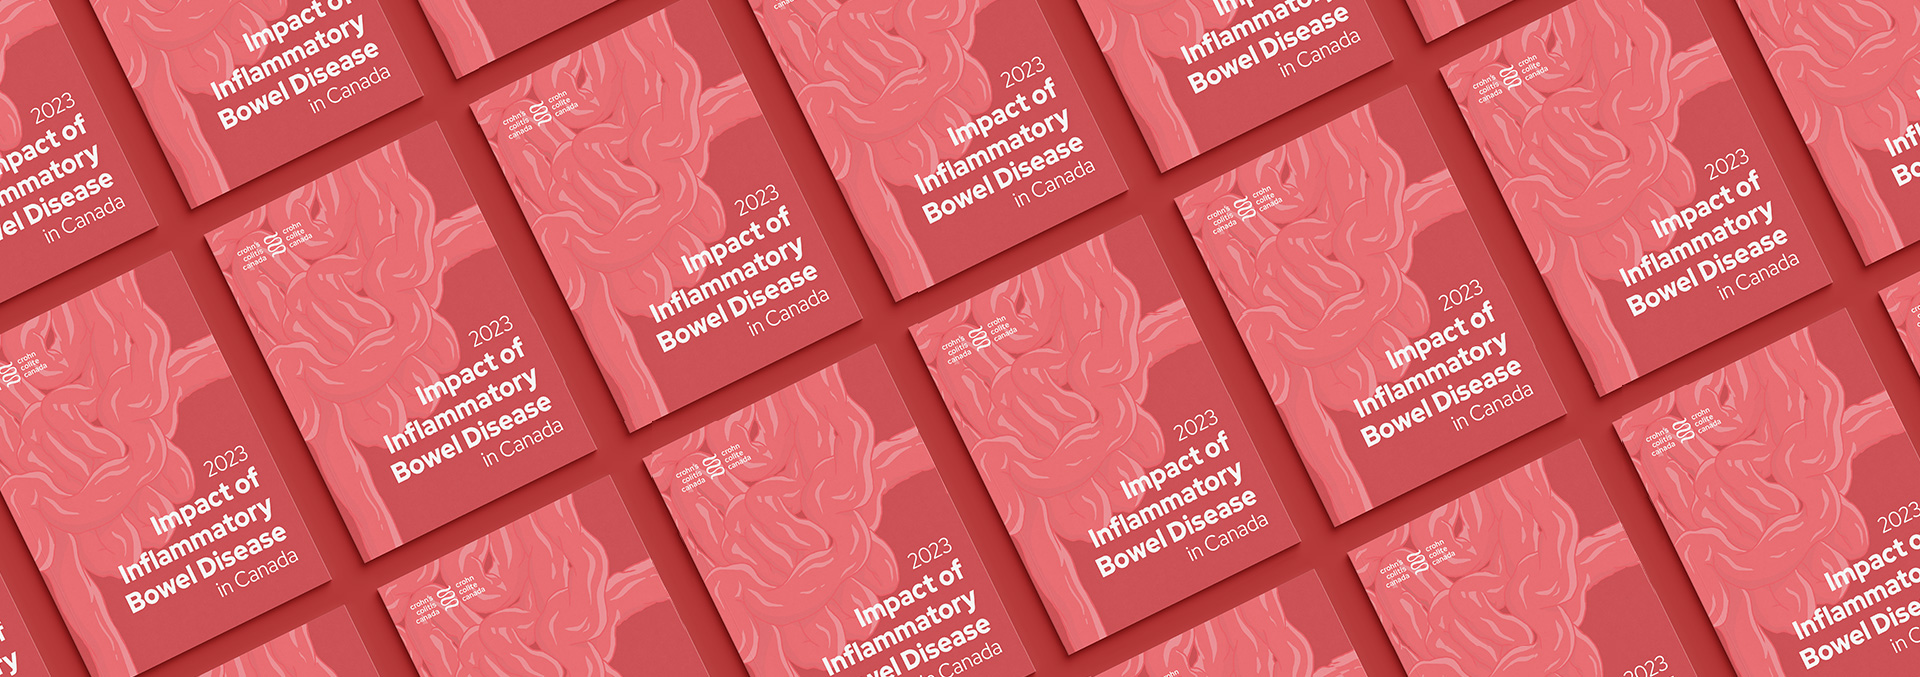 Report on the impact of inflammatory bowel disease with red and pink colors